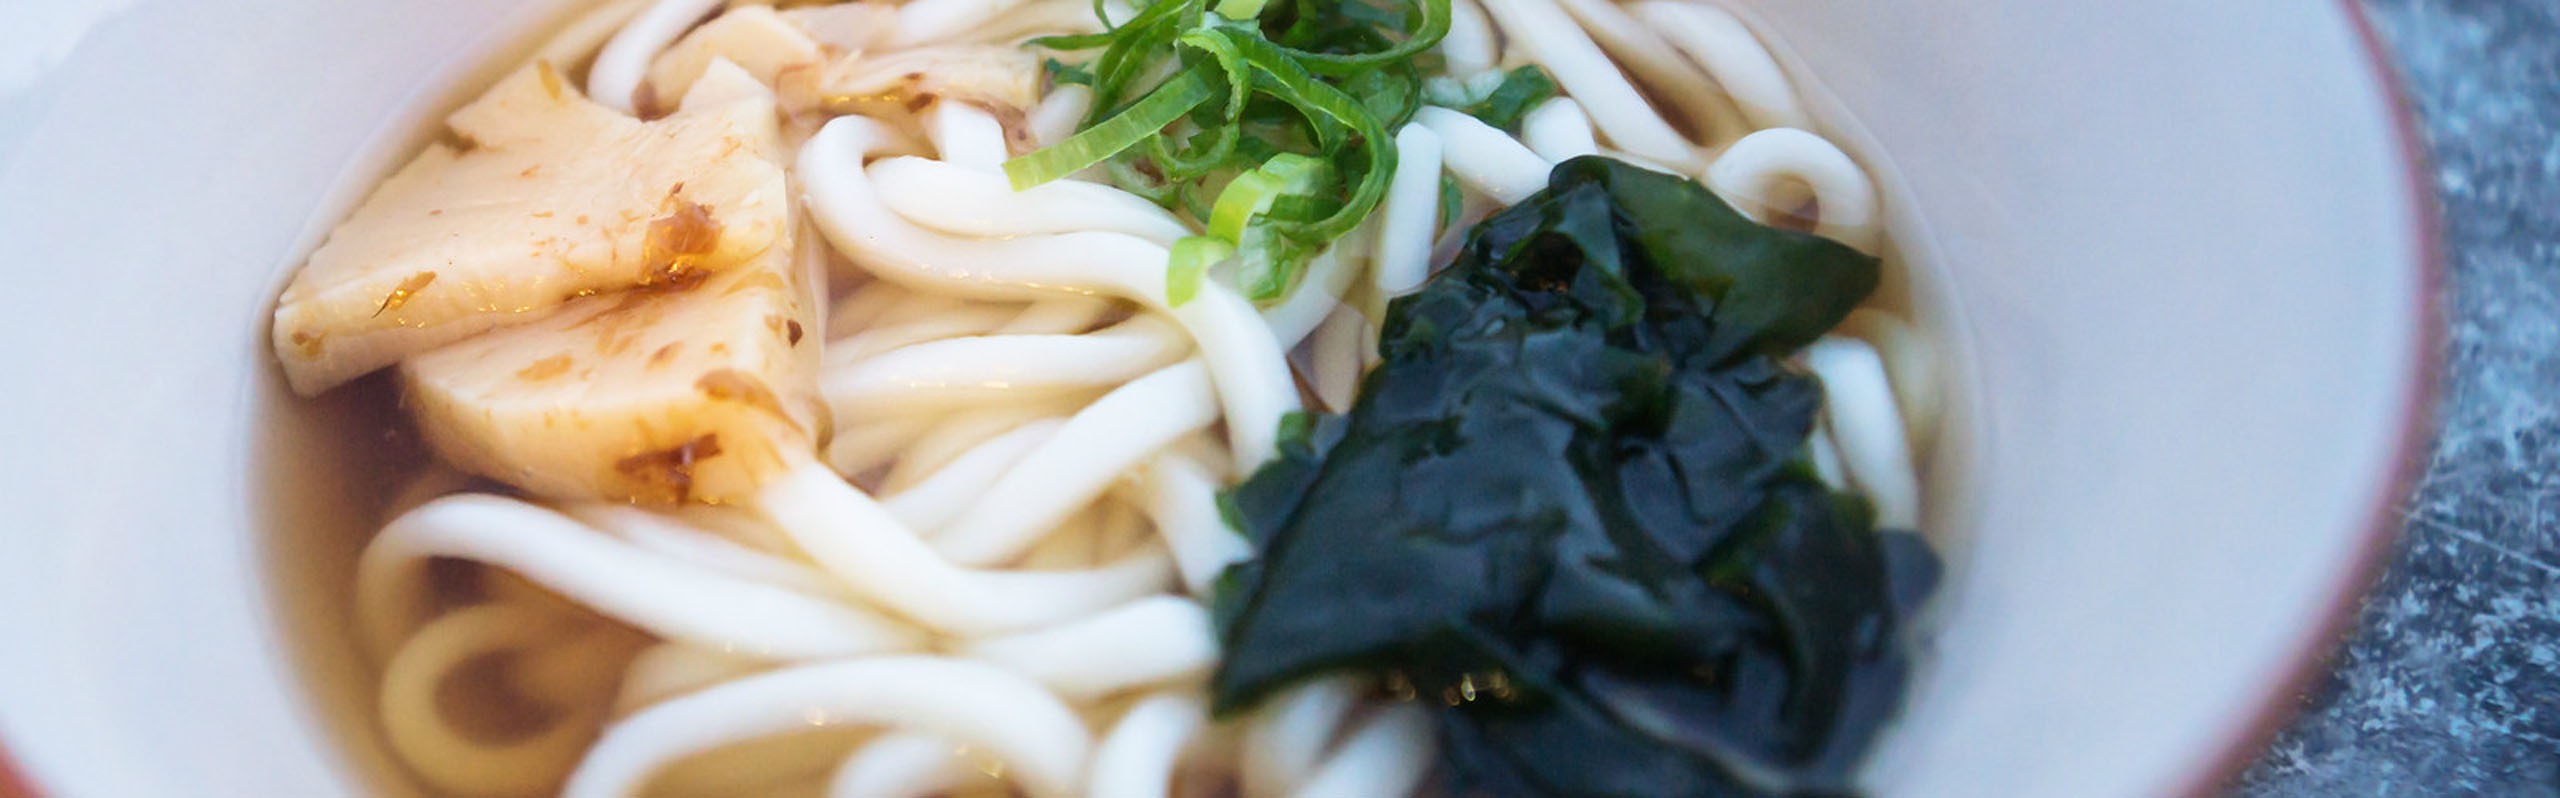 Soba vs Udon - A Complete Guide to Popular Japanese Noodles 